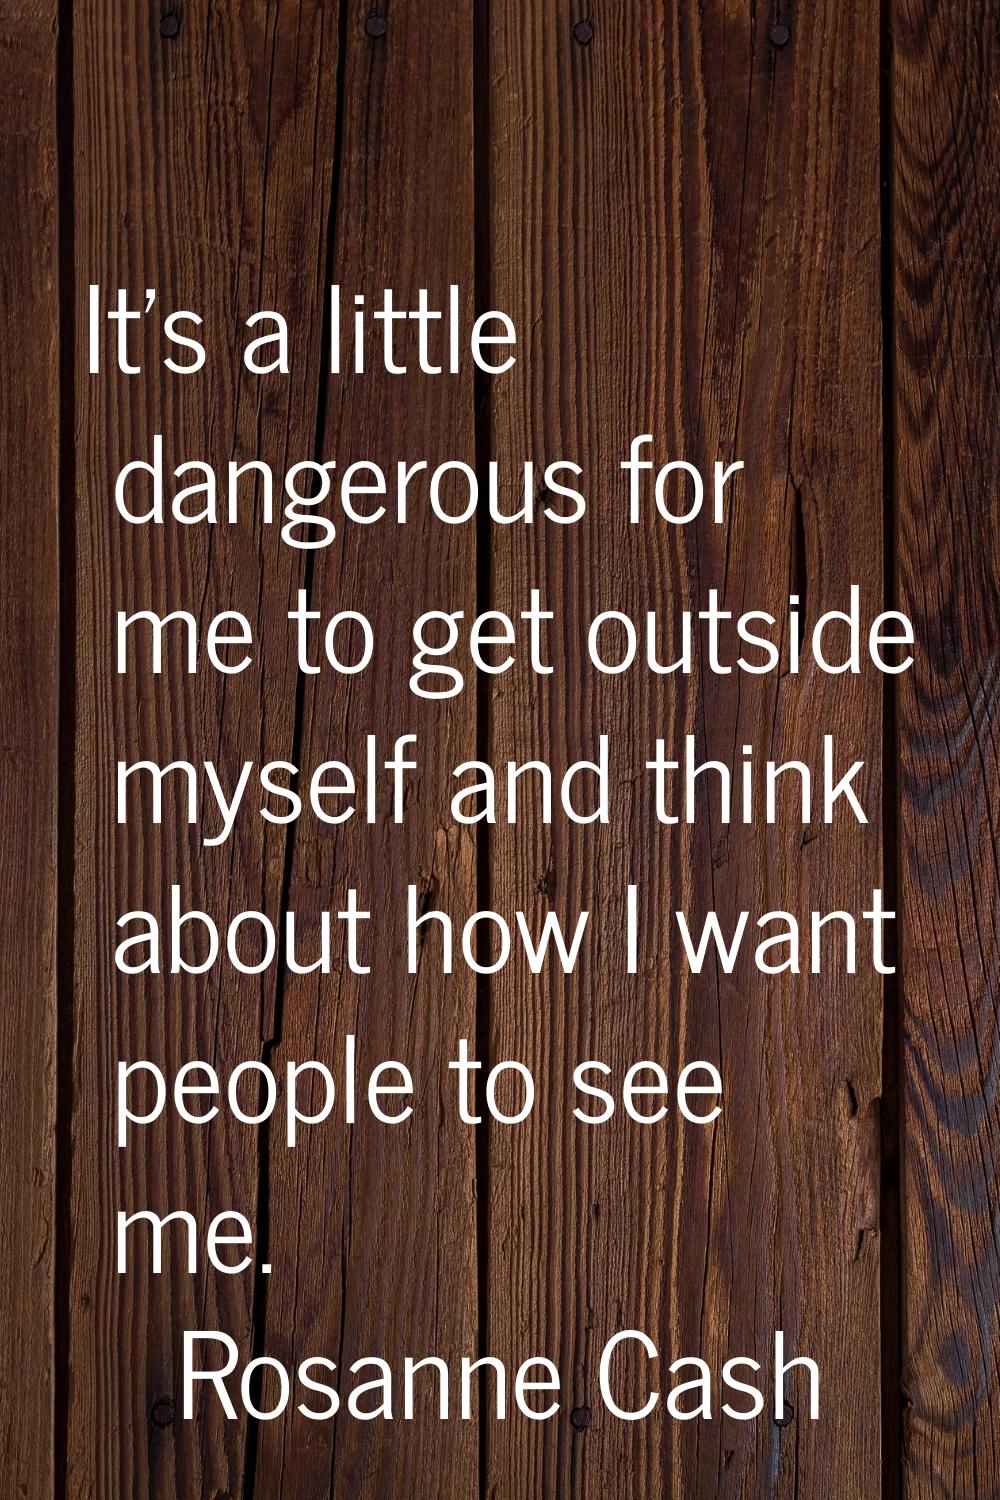 It's a little dangerous for me to get outside myself and think about how I want people to see me.